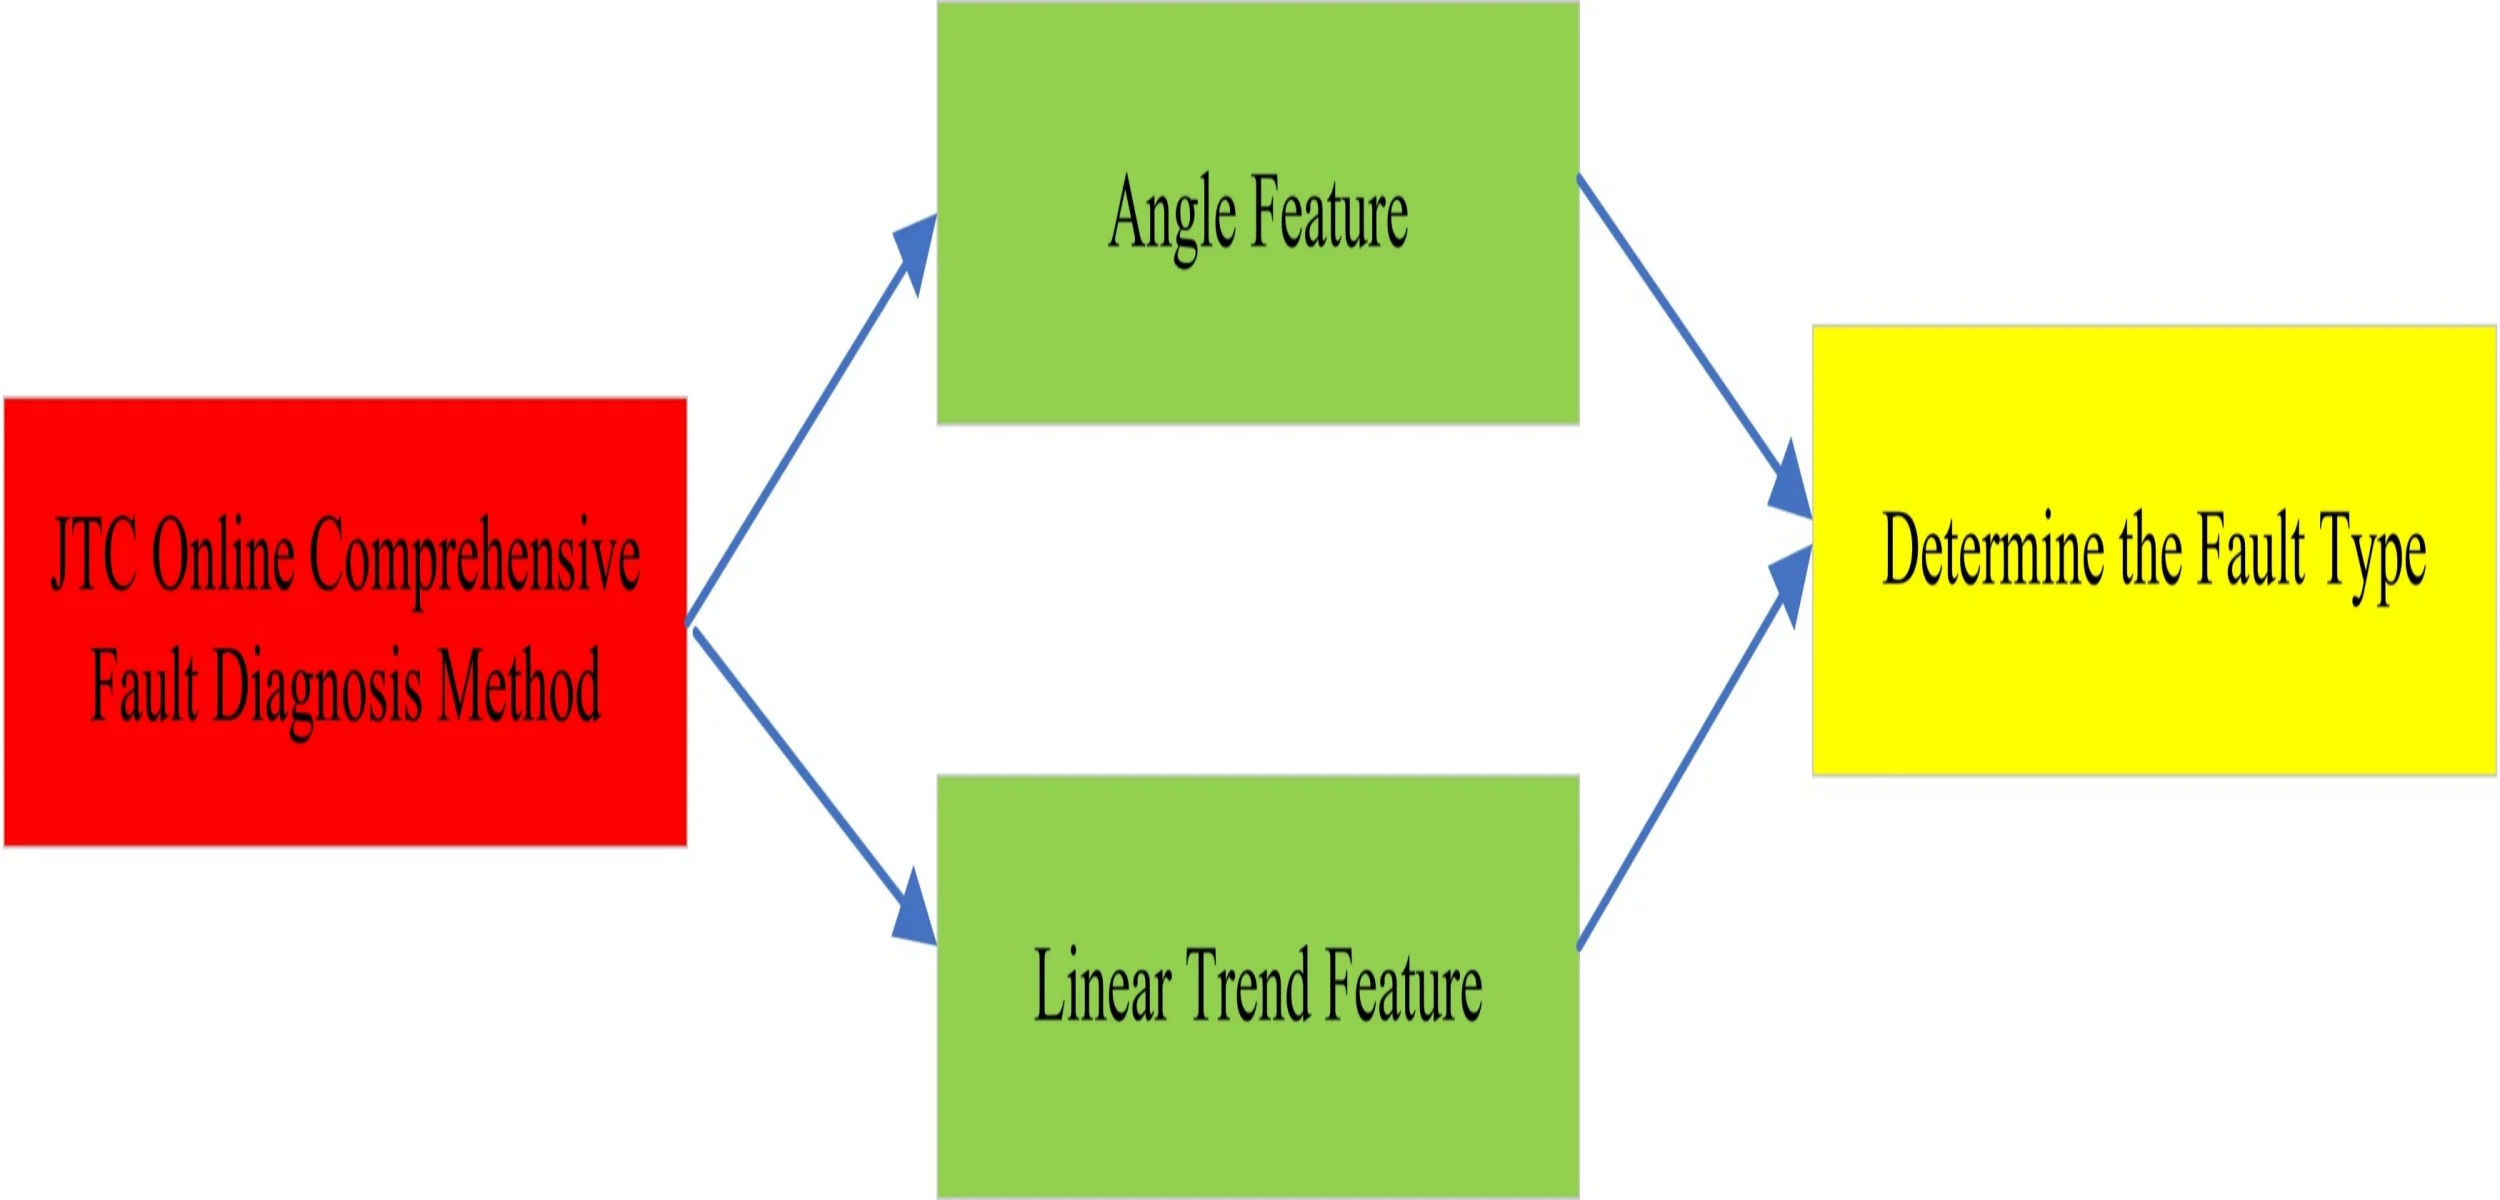 JTC online comprehensive fault diagnosis method based on angle feature and linear trend feature